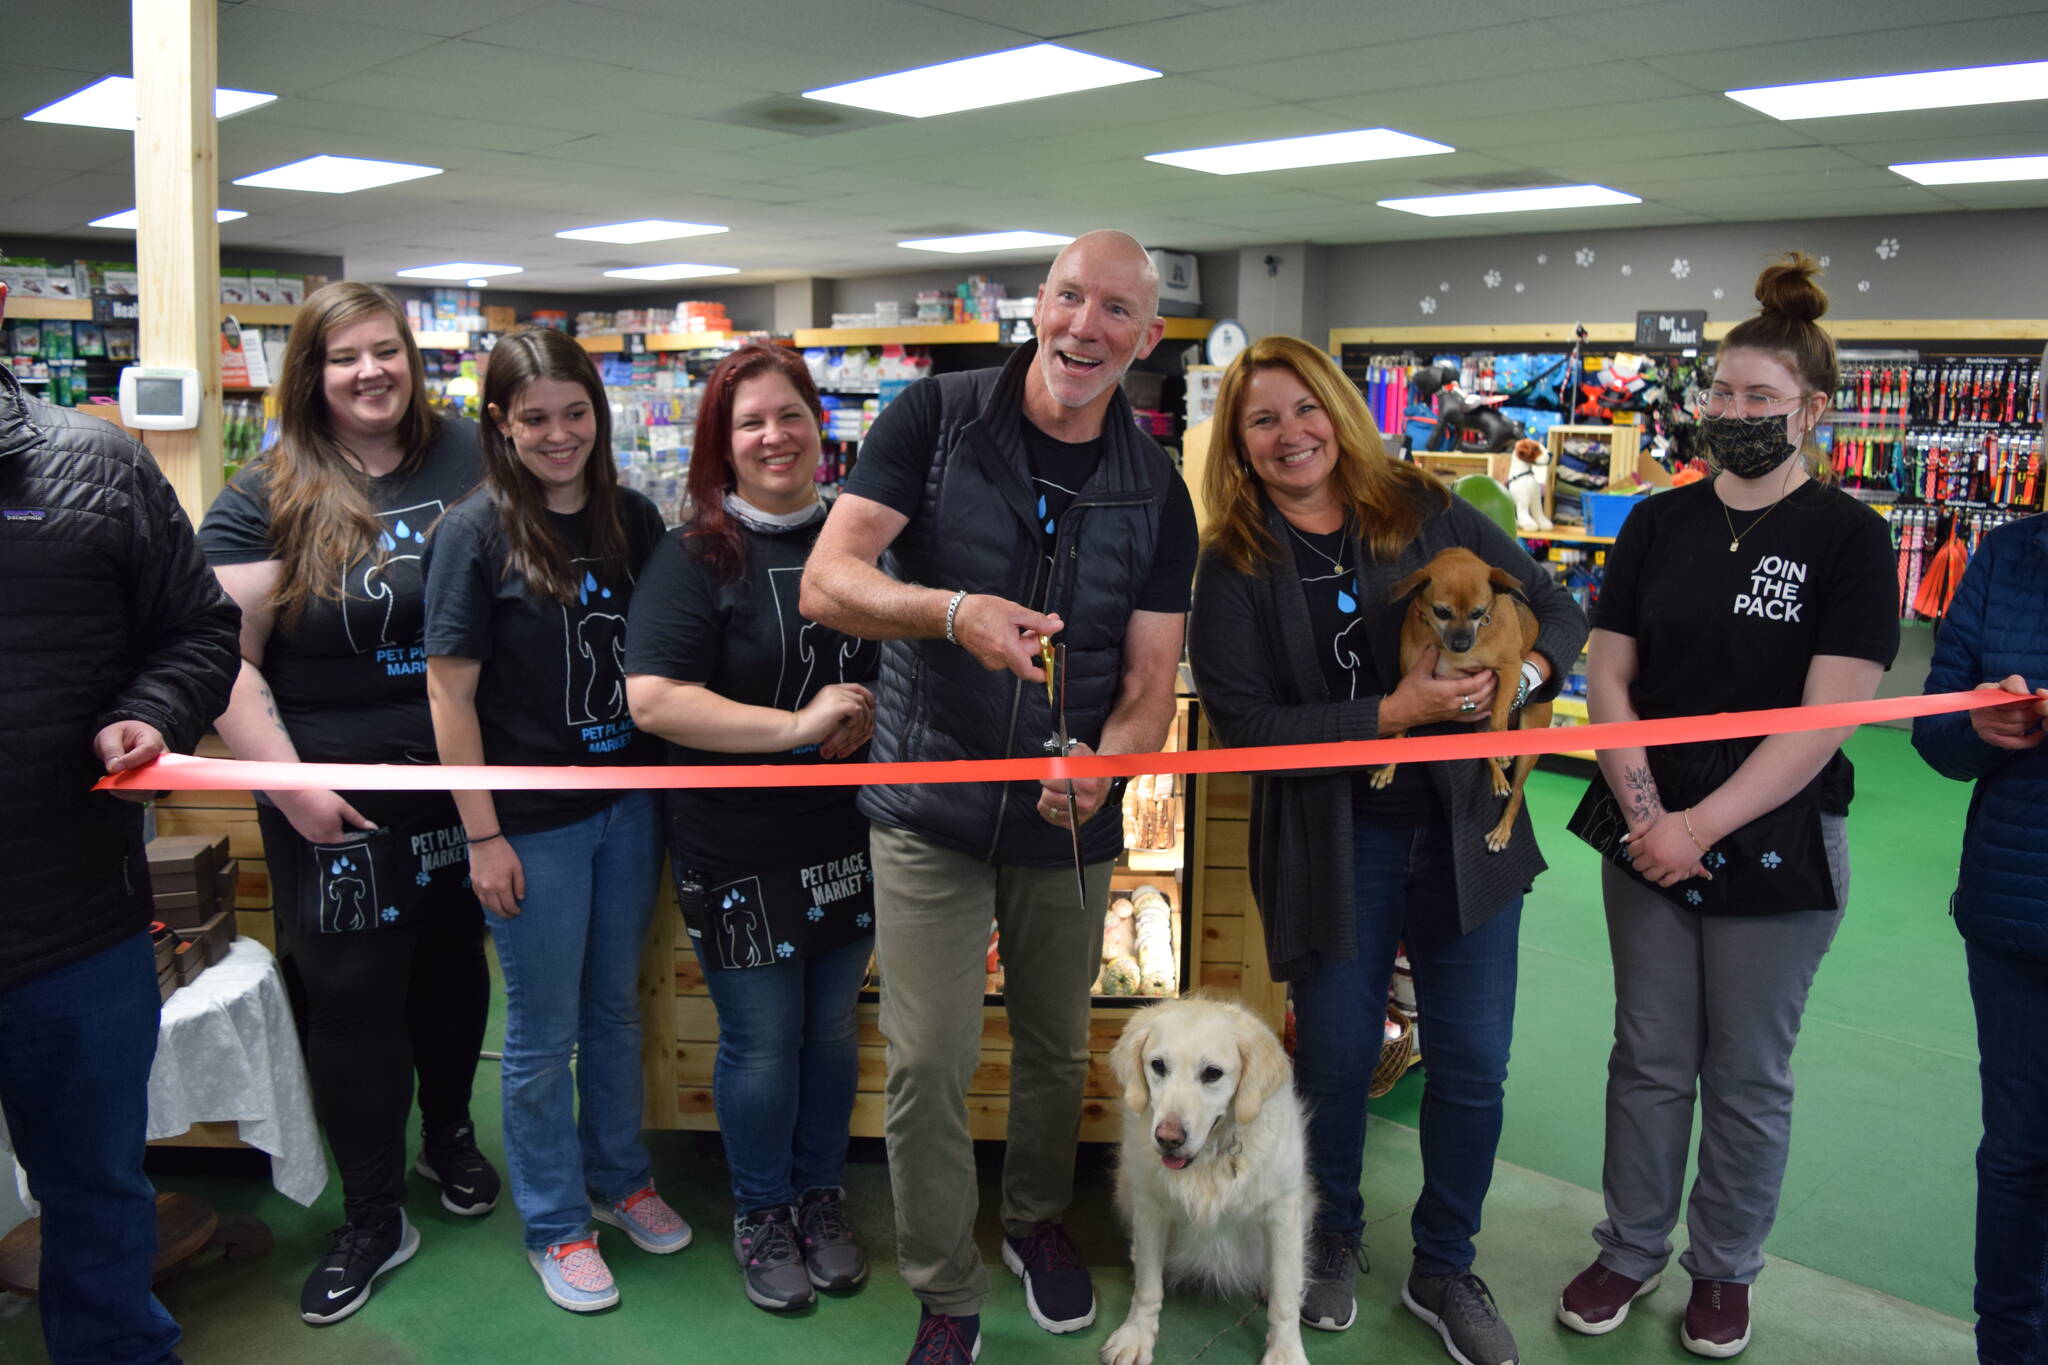 Owners Chris and Amy Hawkins (center) celebrate the 15 year anniversary and grand re-opening of Pet Place Market in North Bend on April 20, alongside staff and their dogs: Nala (l) and Jazzy. Photo Conor Wilson/Valley Record.